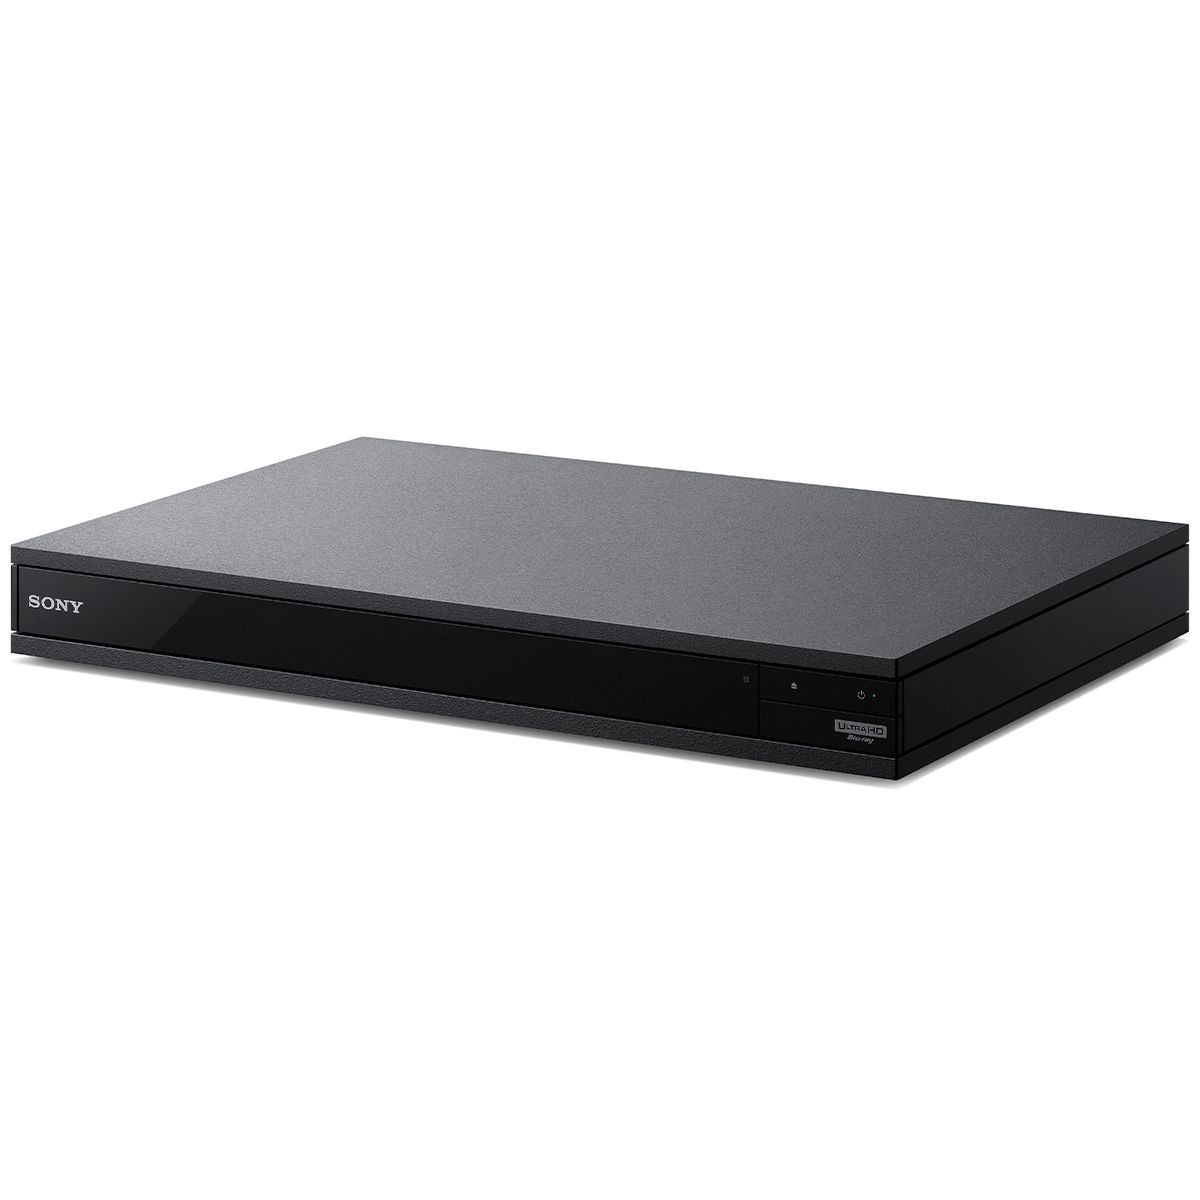 Sony Blu-ray Player with 4K Upscaling and Wi/Fi for Streaming Video